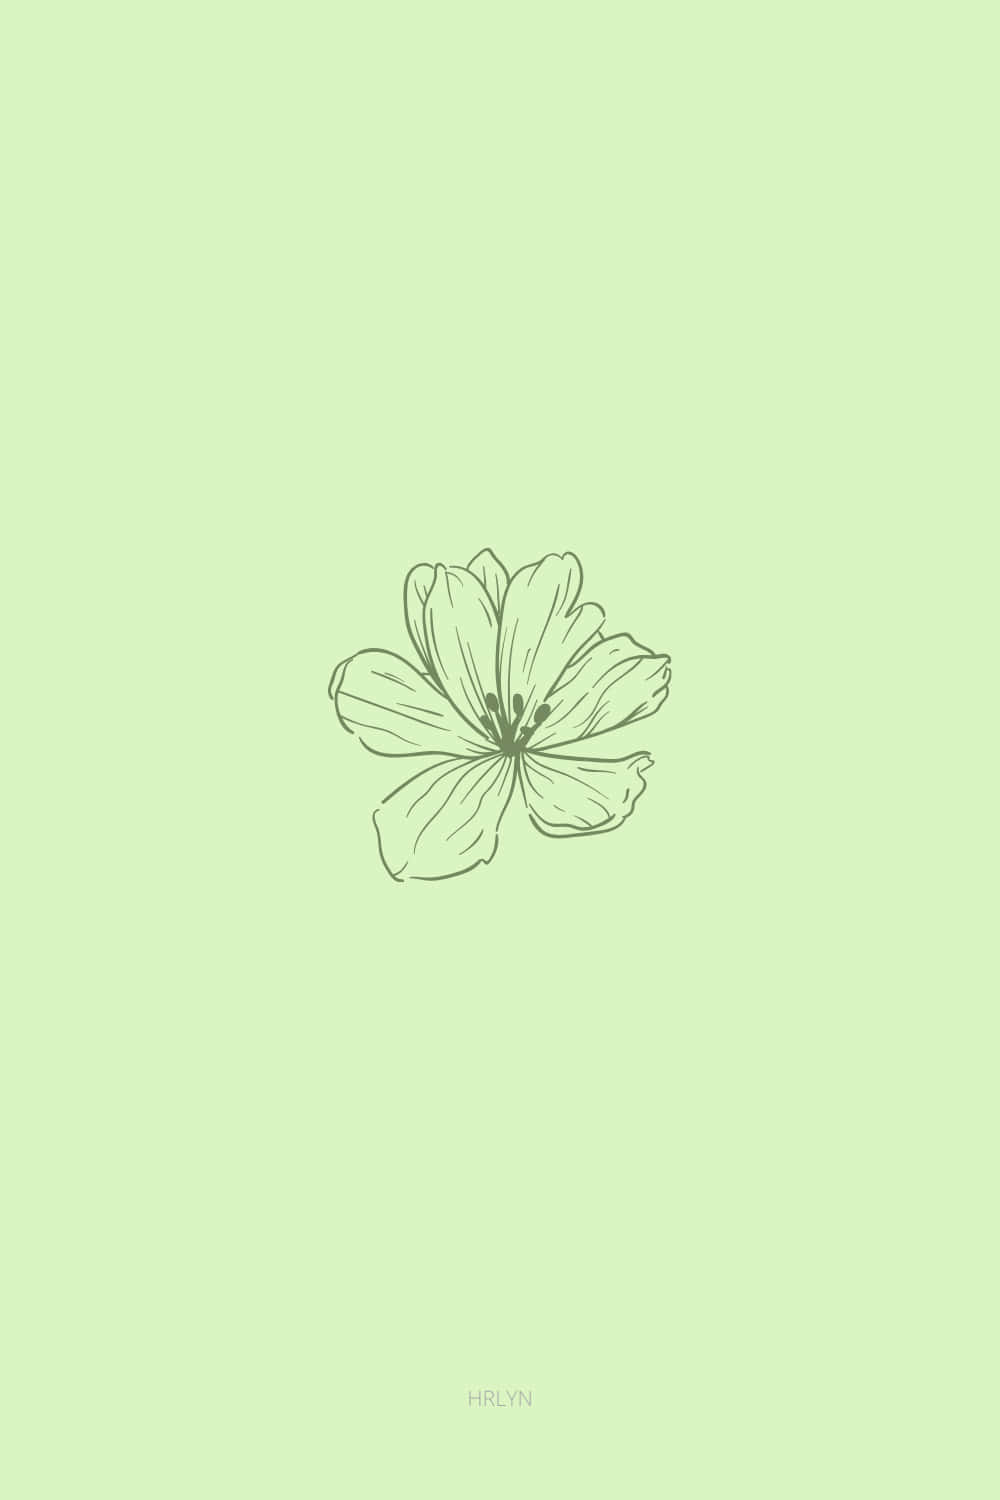 Cute Sage Green Flower Drawn On The Center Wallpaper